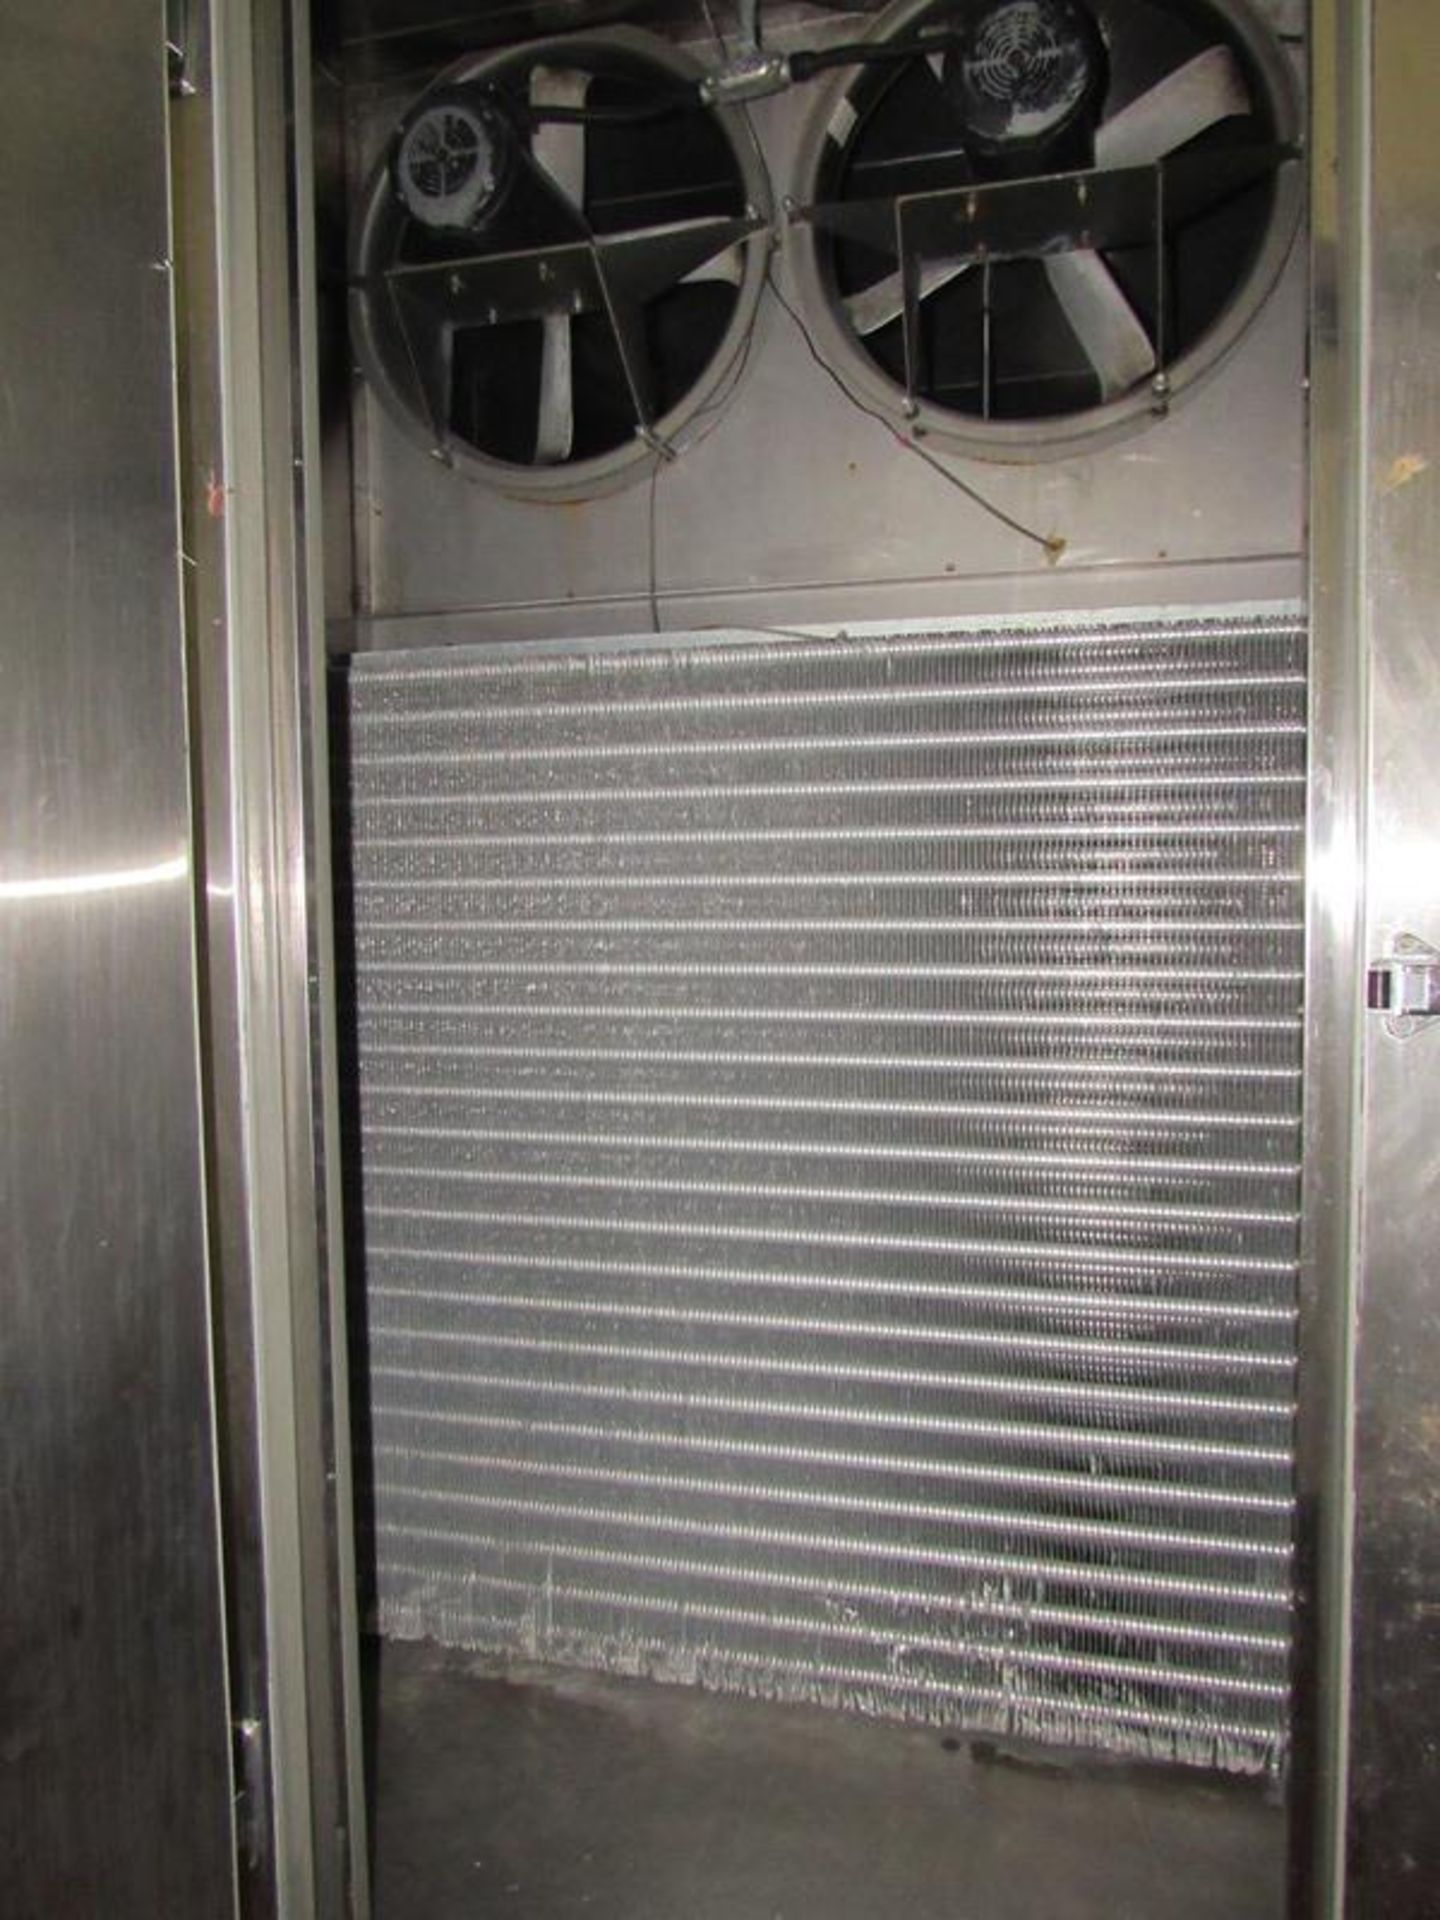 Process Engineering & Fabrication Mdl. 12SR13SP Stainless Steel Spiral Freezer, Ser. #3135-7-96, - Image 8 of 11